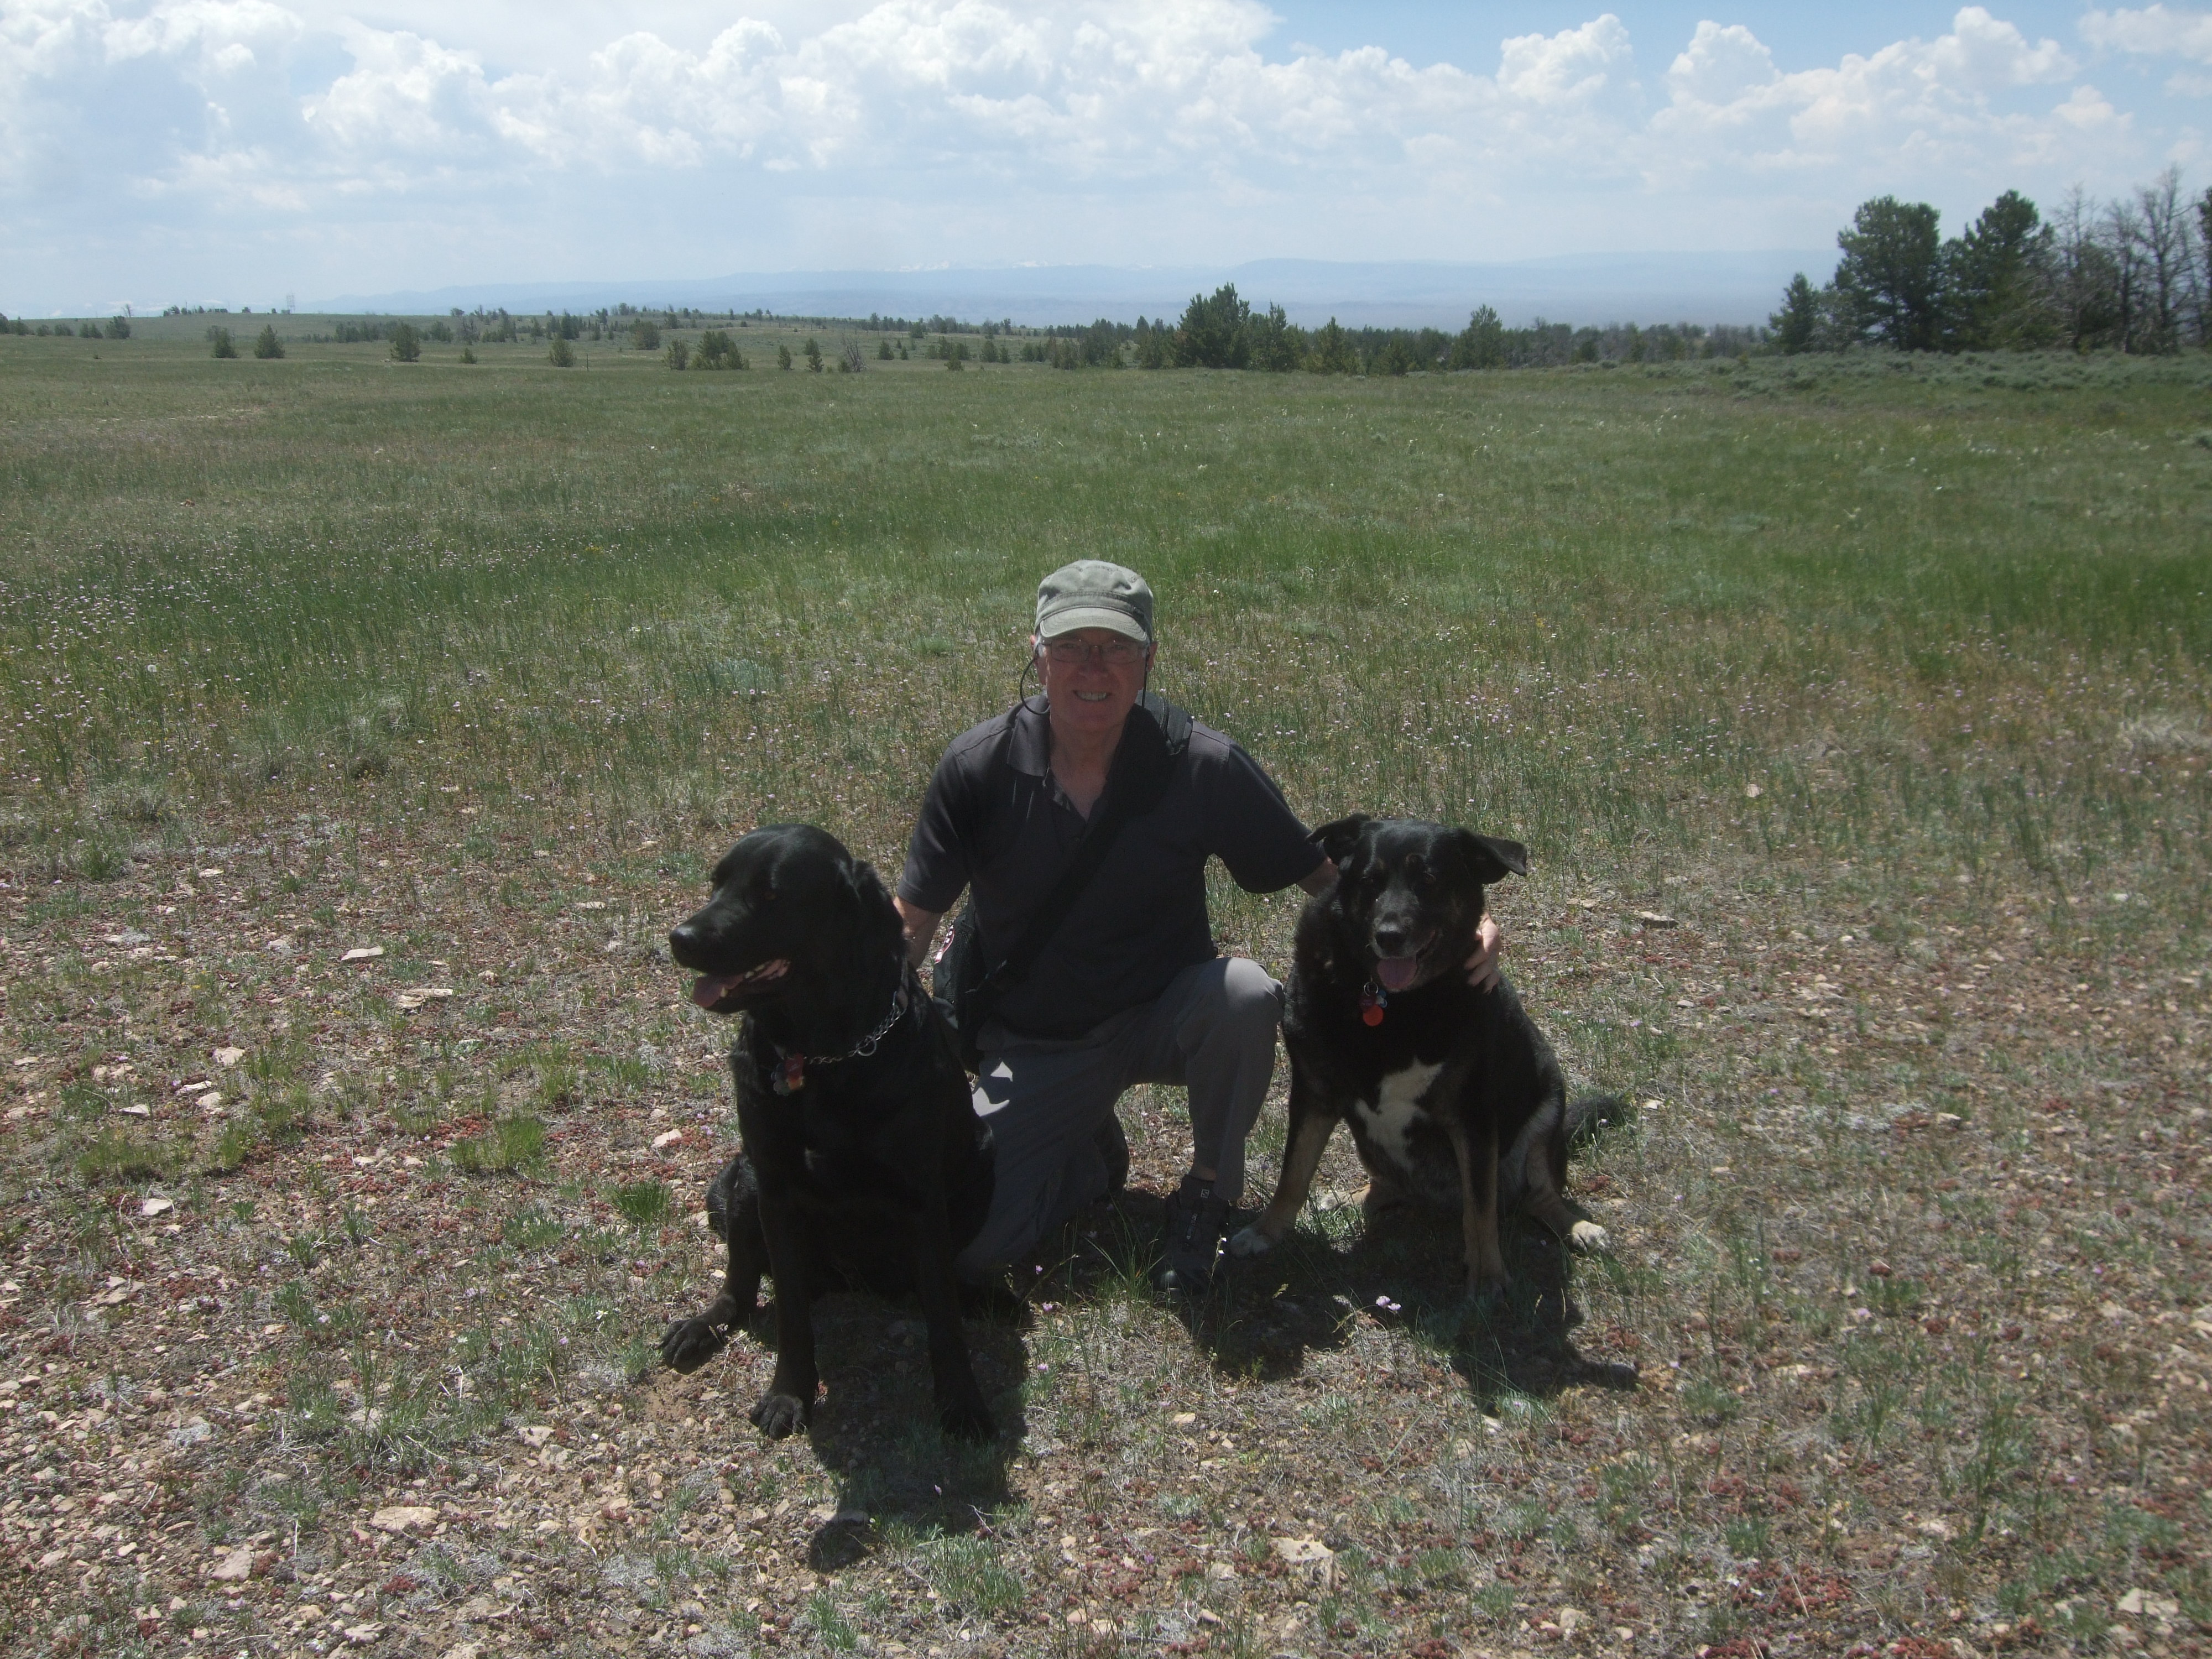 Bill and his 2 buddies - Luck and Sierra